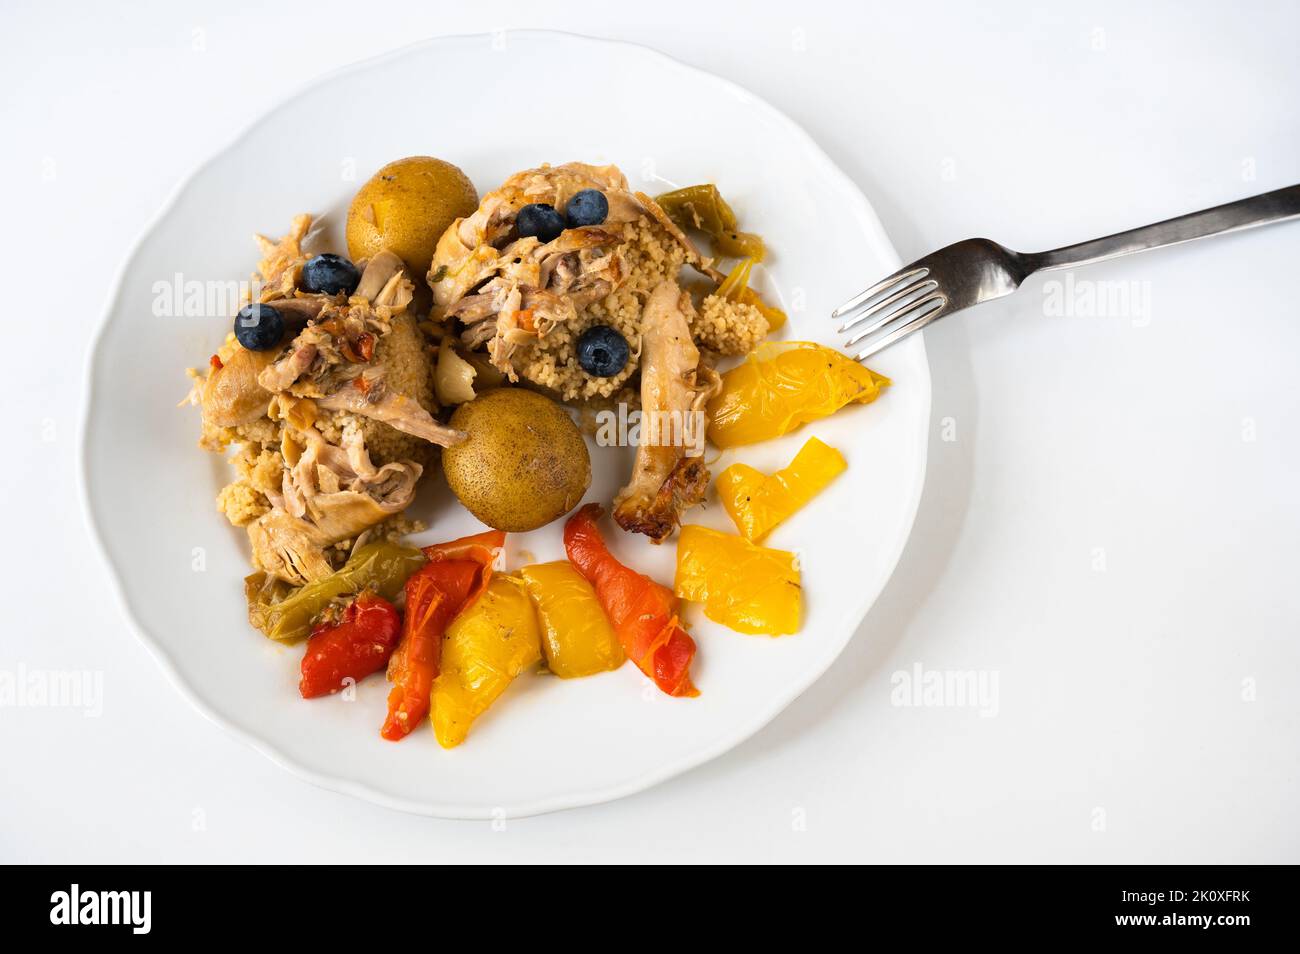 Baked piece of hen meat on couscous, potato, baked multicoloured paprika and blueberry on white plate, fork on white background, closeup. Serving size Stock Photo